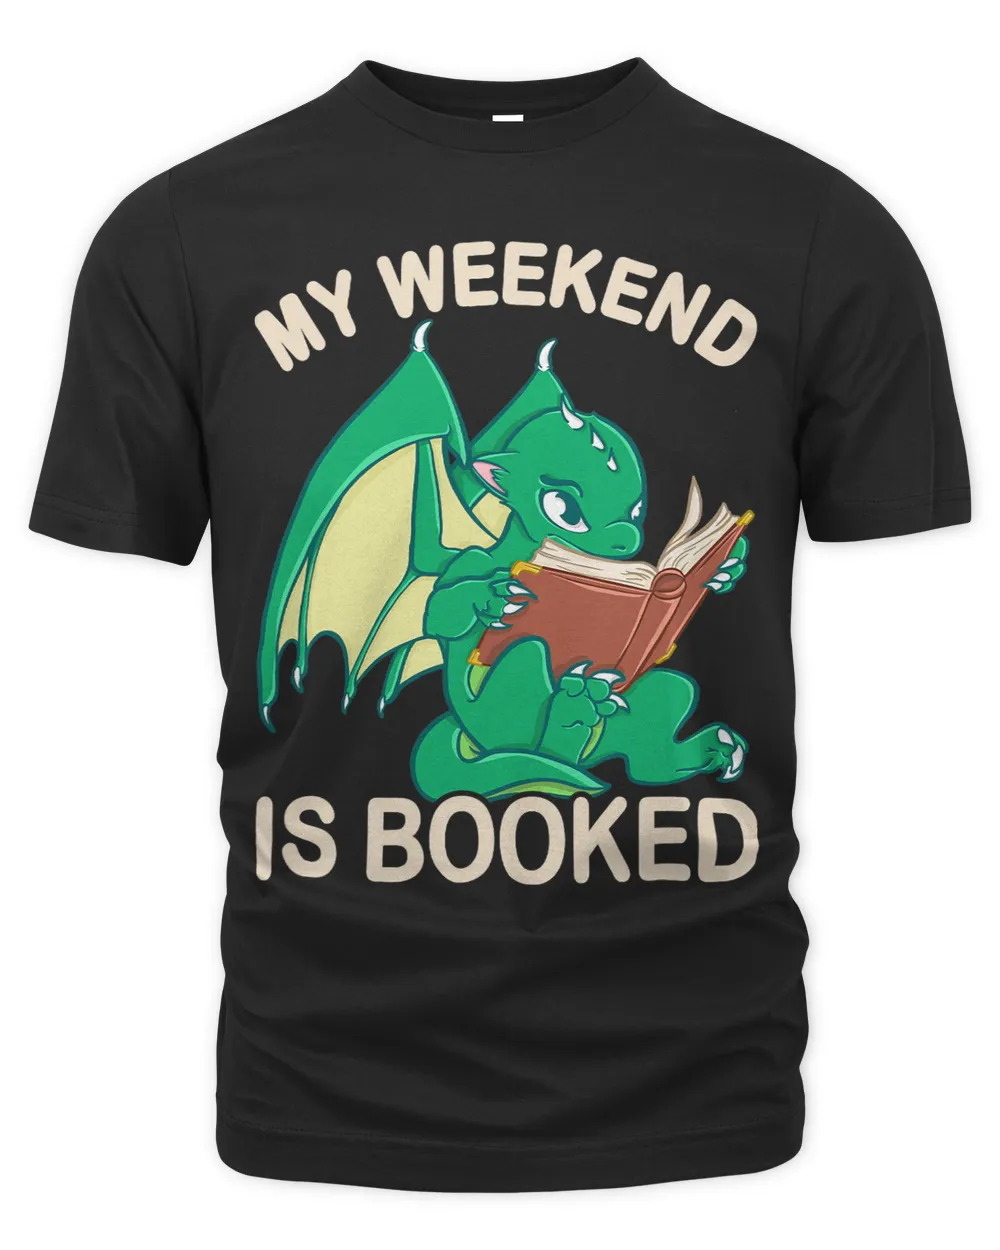 My weekend is Booked Nerdy Book Lover saying 1